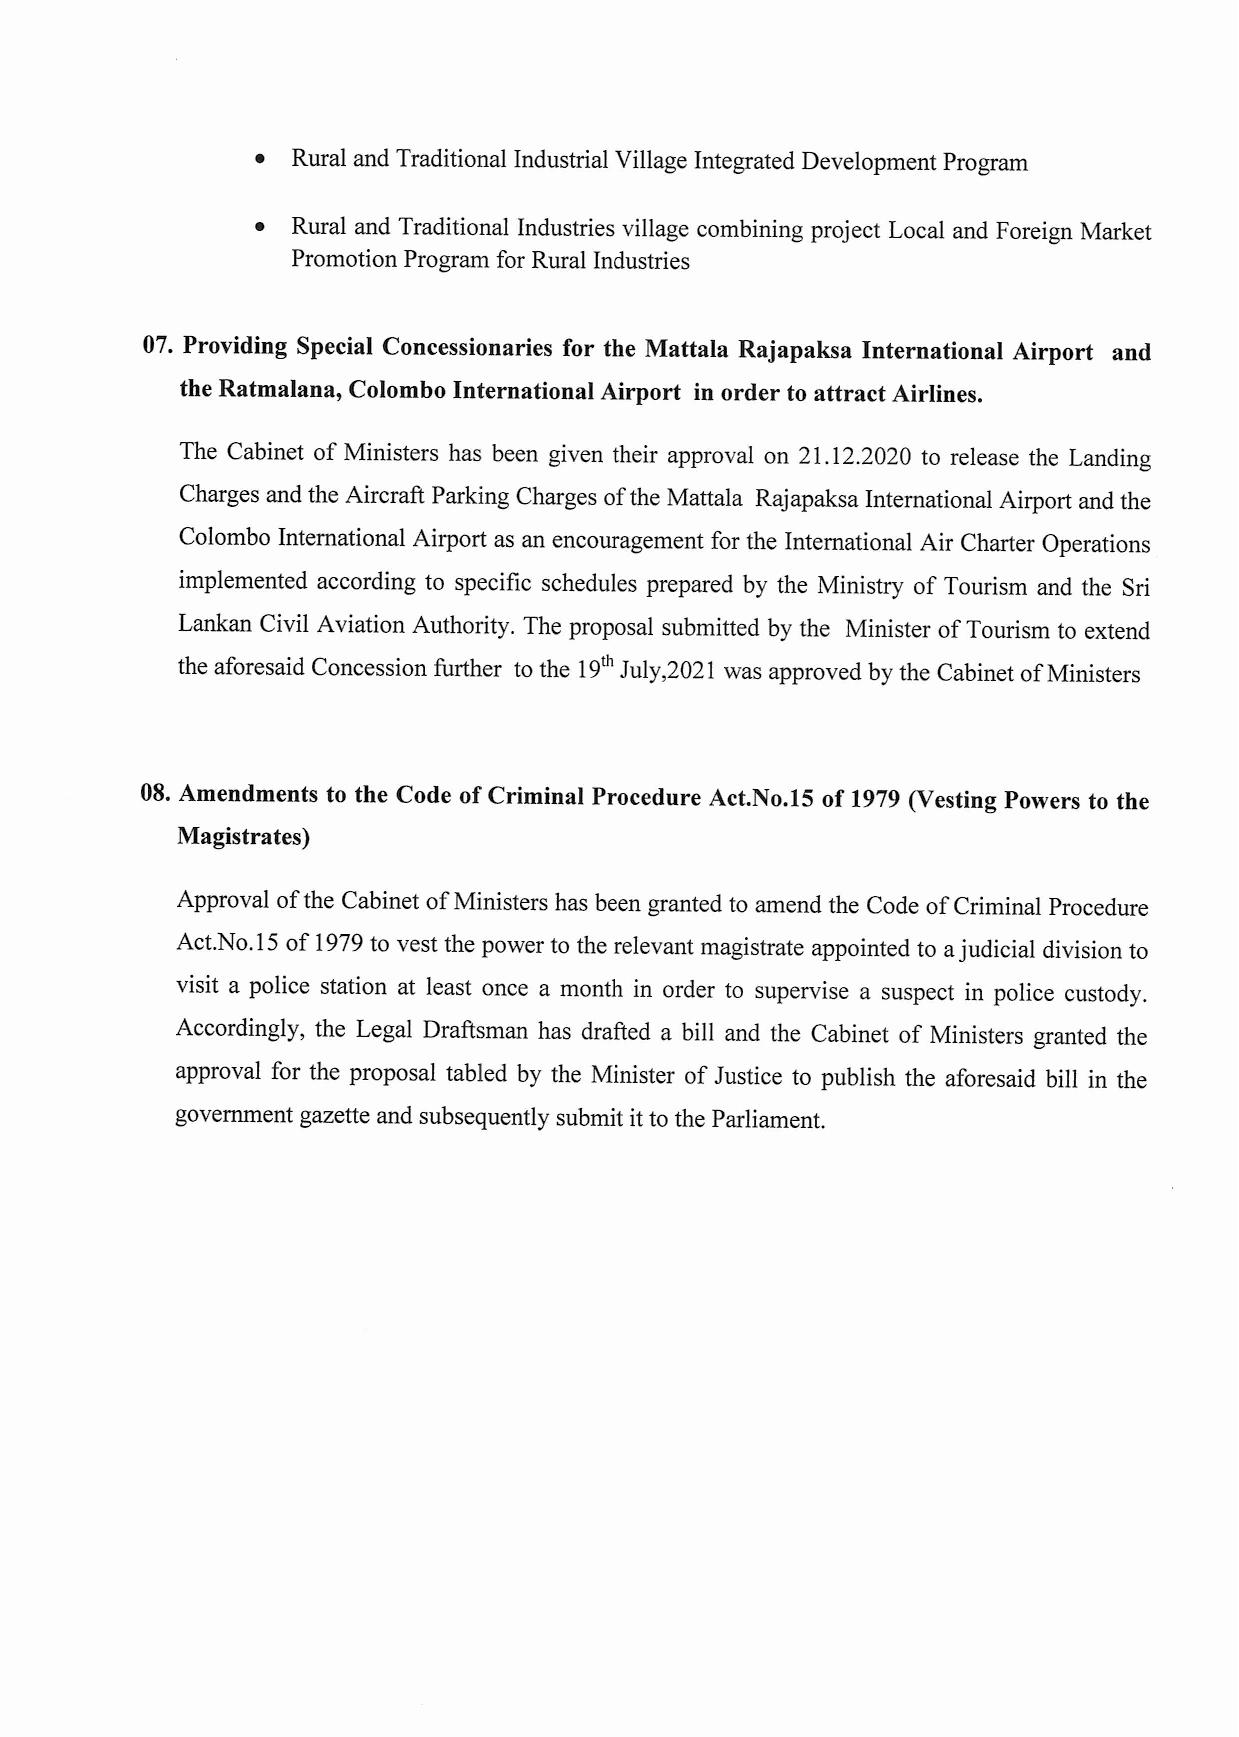 Cabinet Decision on 15.02.2021 English page 004